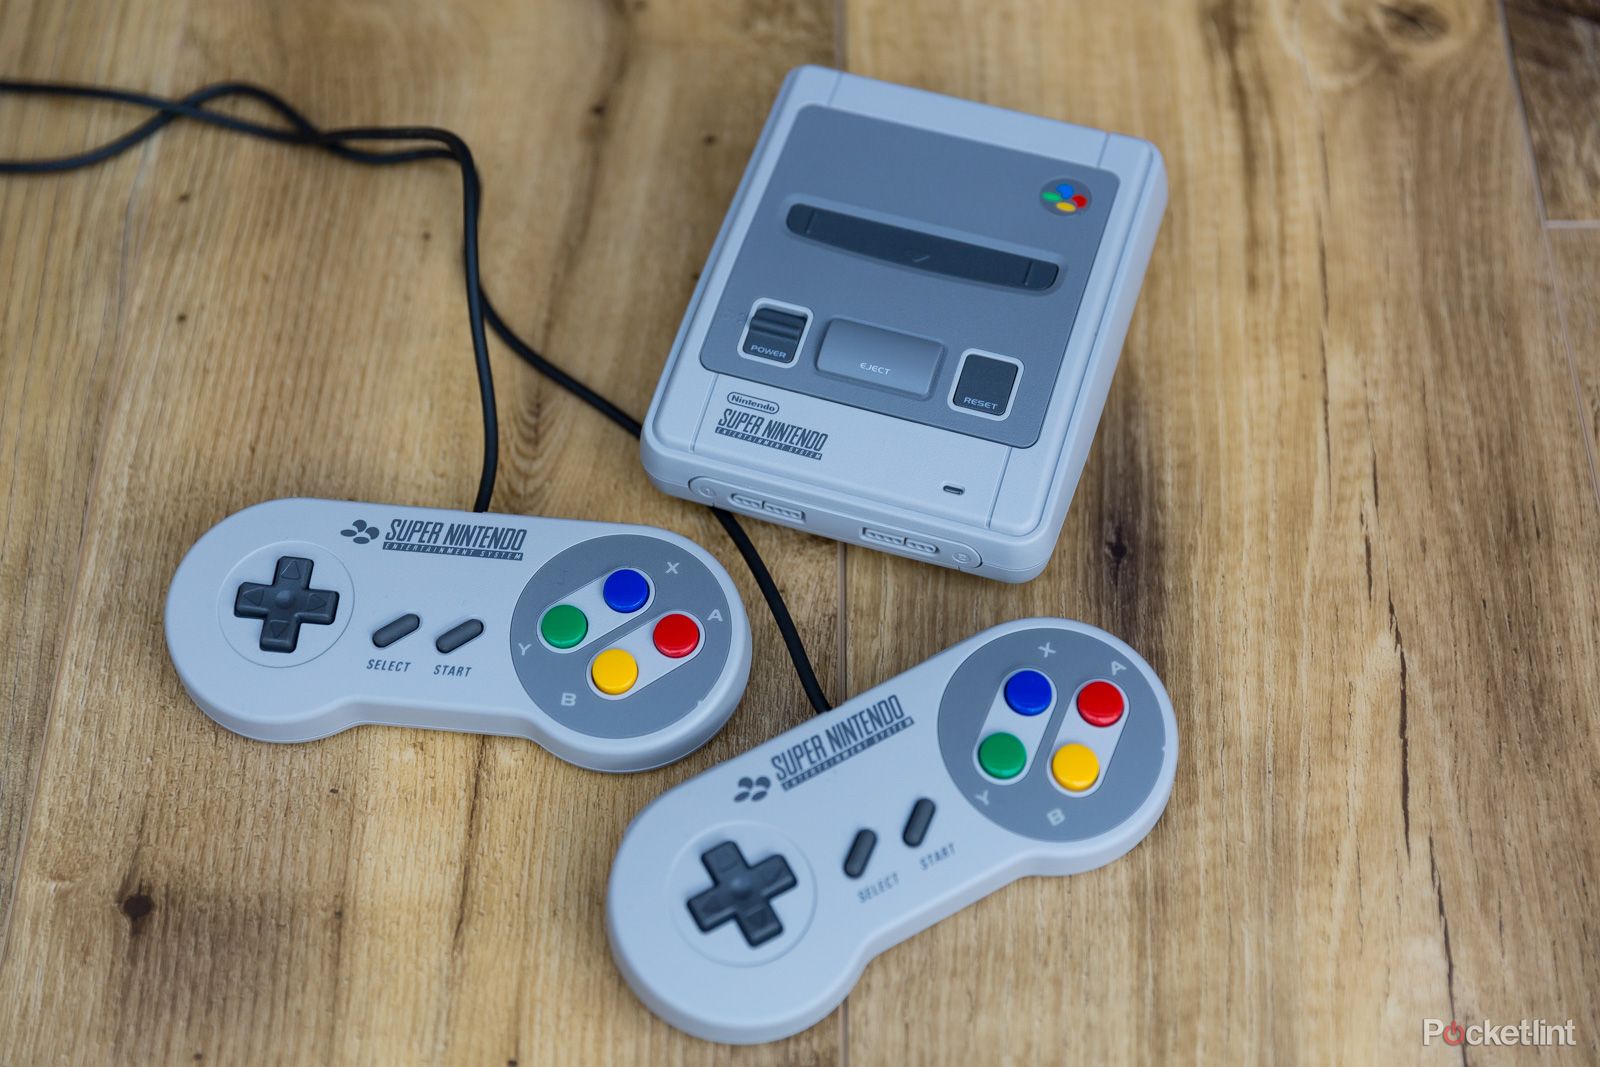 The Best Retro Games Consoles For 2020 Go Back To The Future image 3